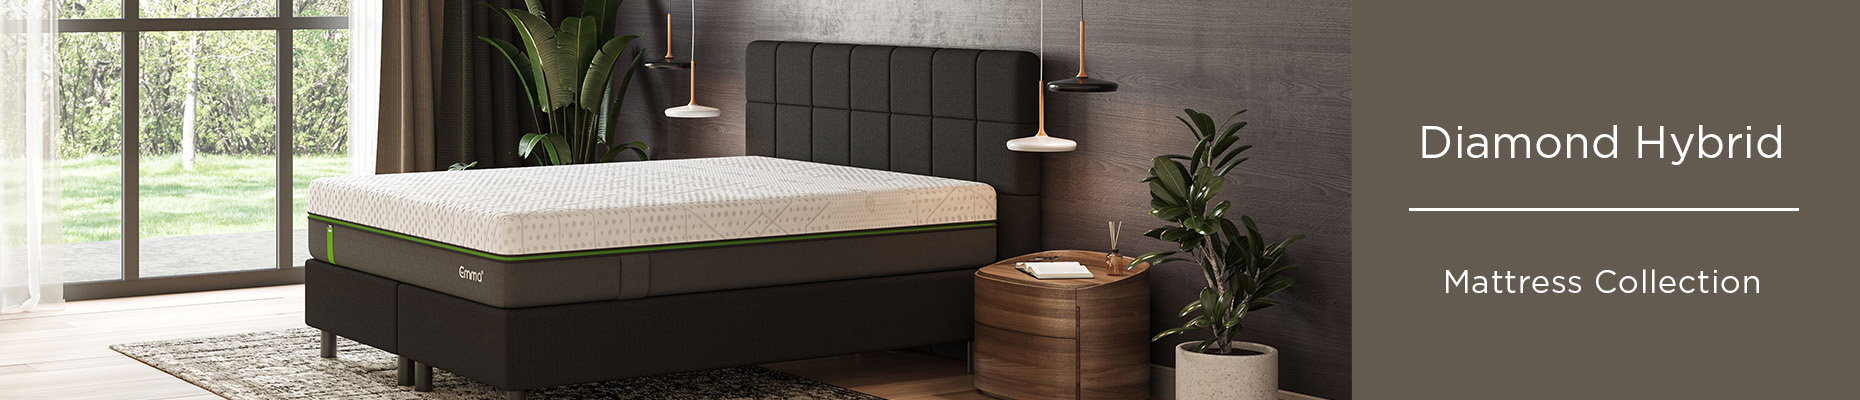 Diamond Hybrid collection from Emma Sleep at Forrest Furnishing